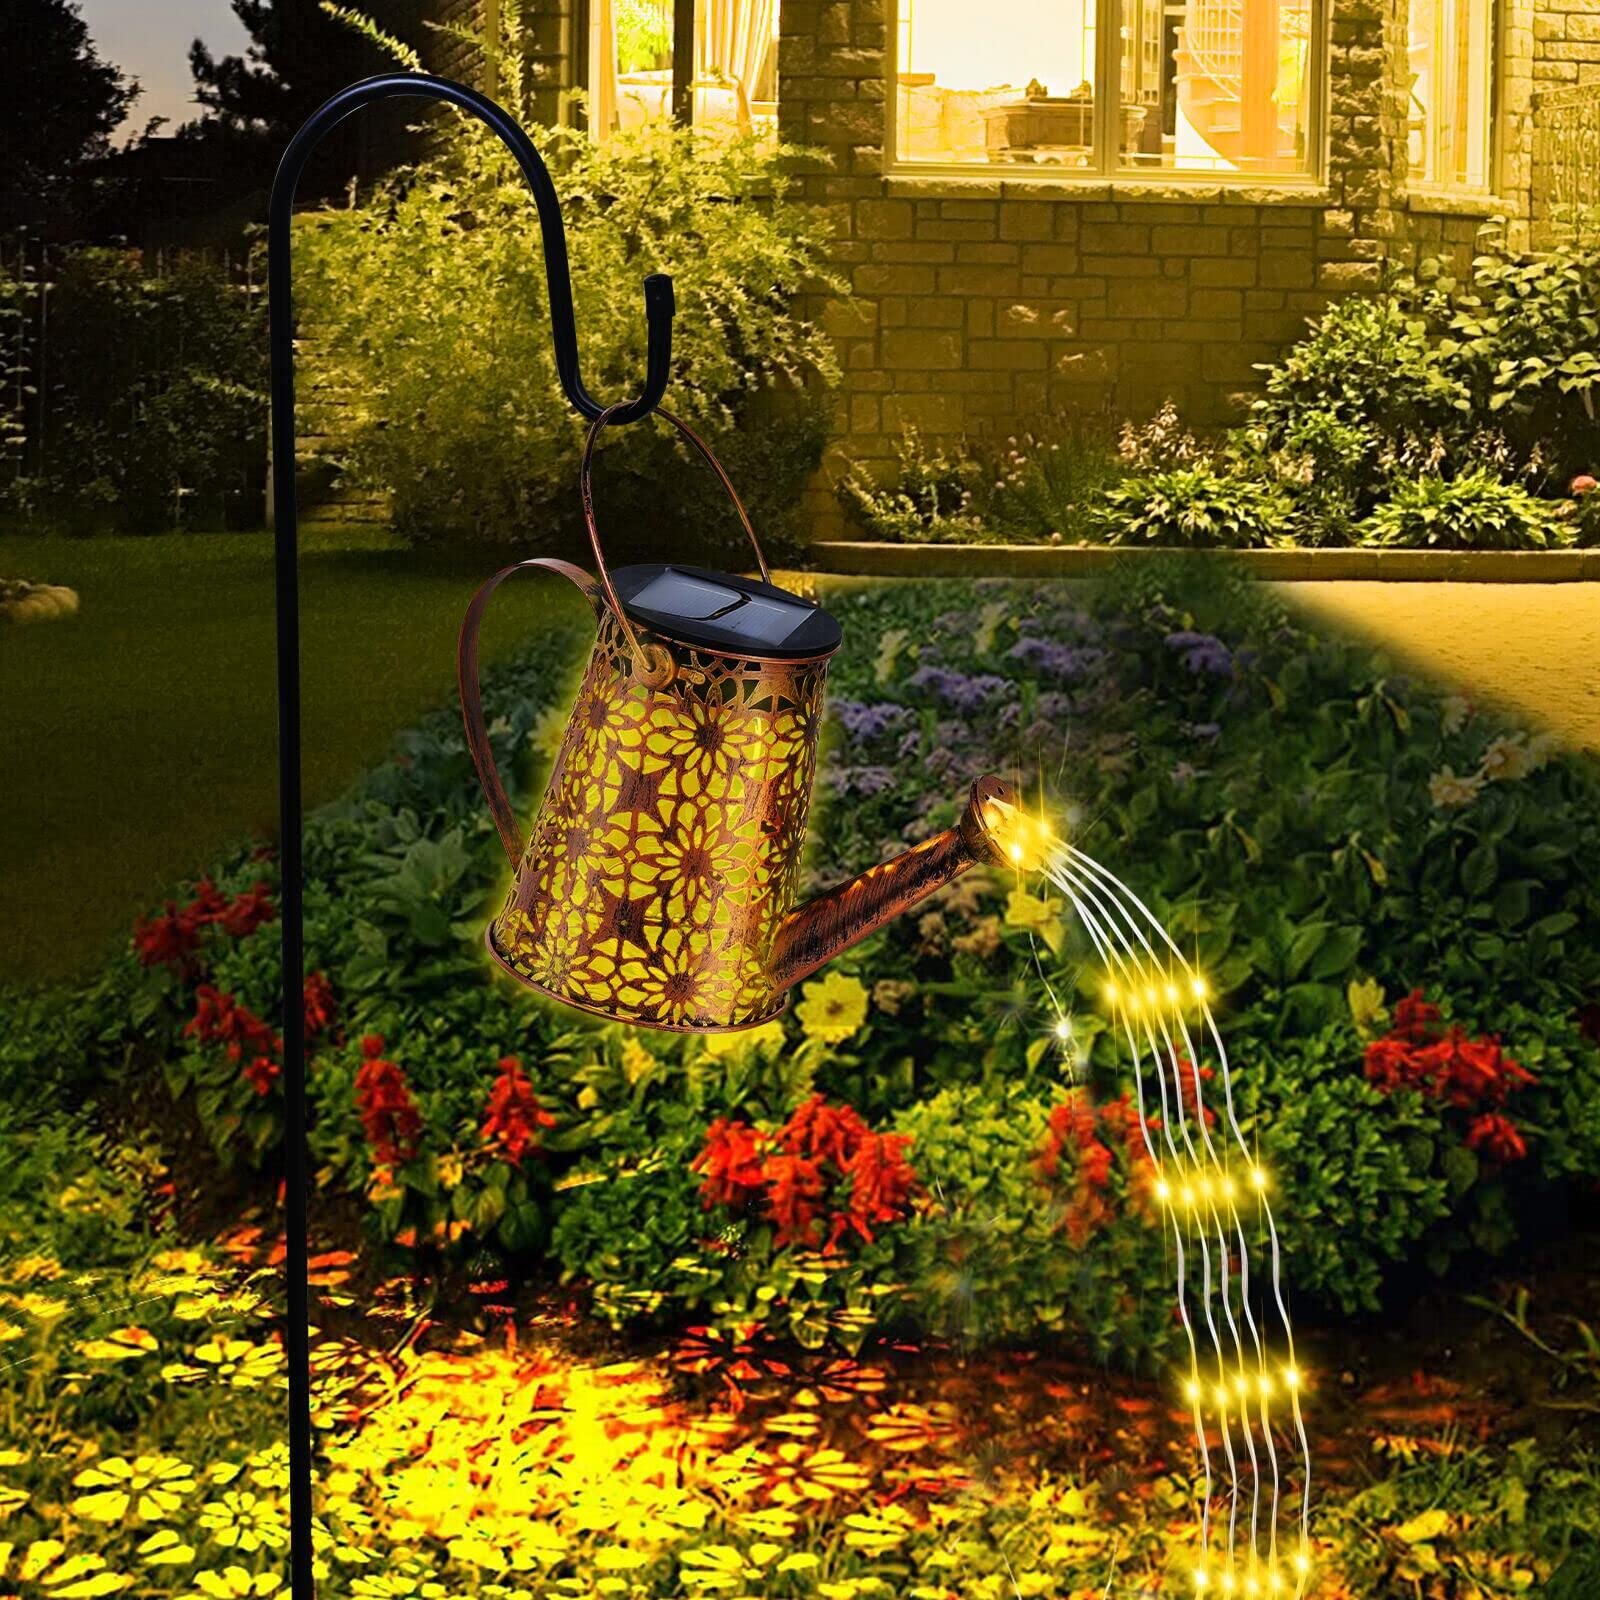 Solar Watering Can Lights, Hbaid 50 LED Outdoor Star Shower Solar Garden Lights IP65 Waterproof for Walkway Pathway Patio Yard Outdoor Decorations (with Bracket and Garden Cable Ties)